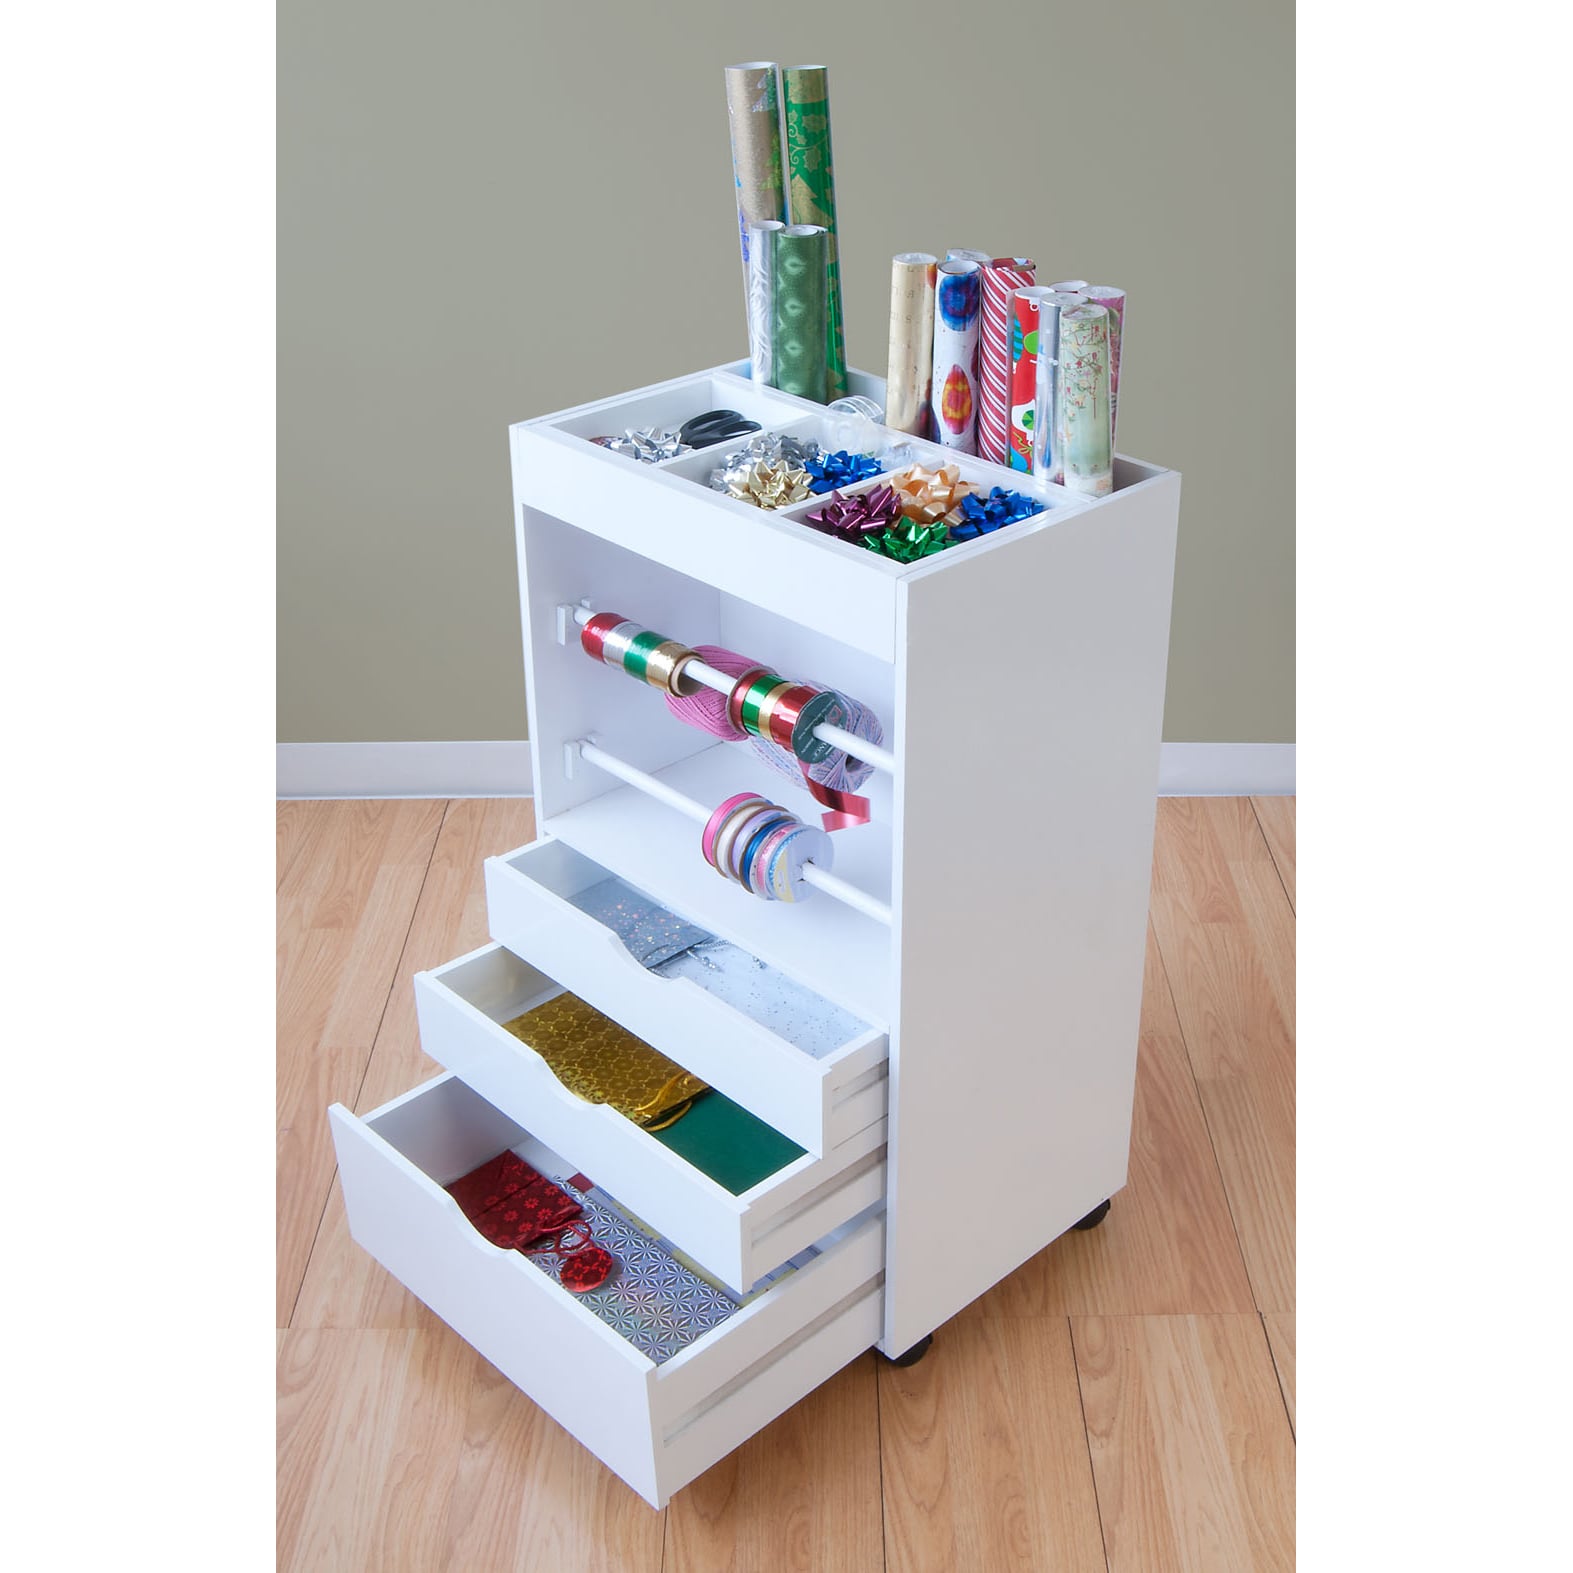 Studio Designs White Wrapping Cart Today $155.07